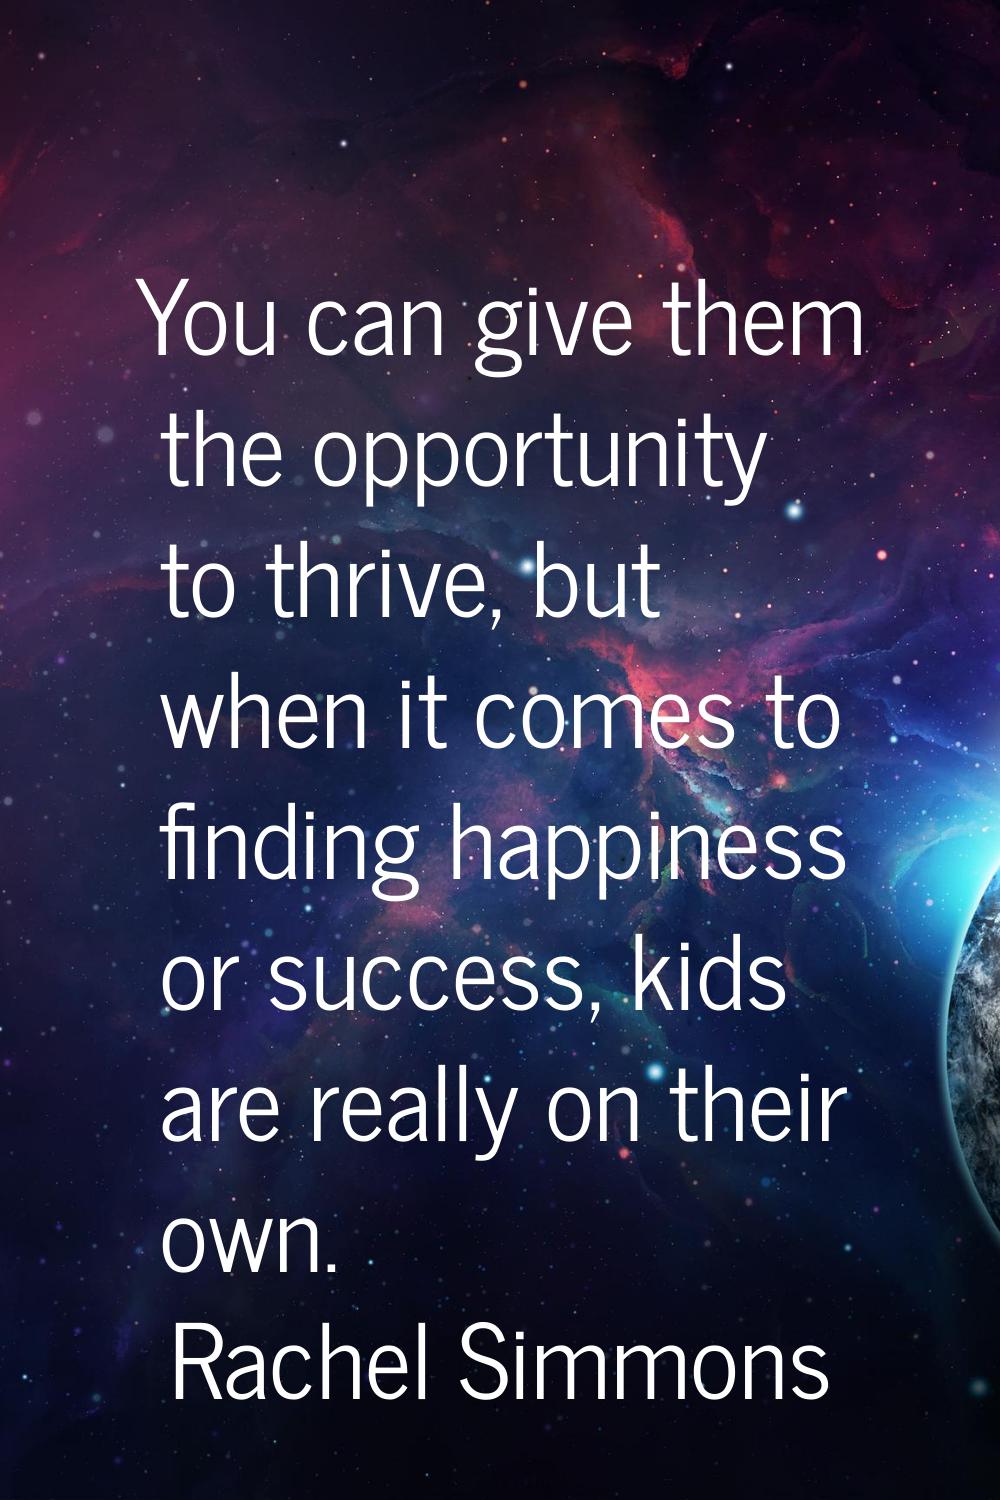 You can give them the opportunity to thrive, but when it comes to finding happiness or success, kid